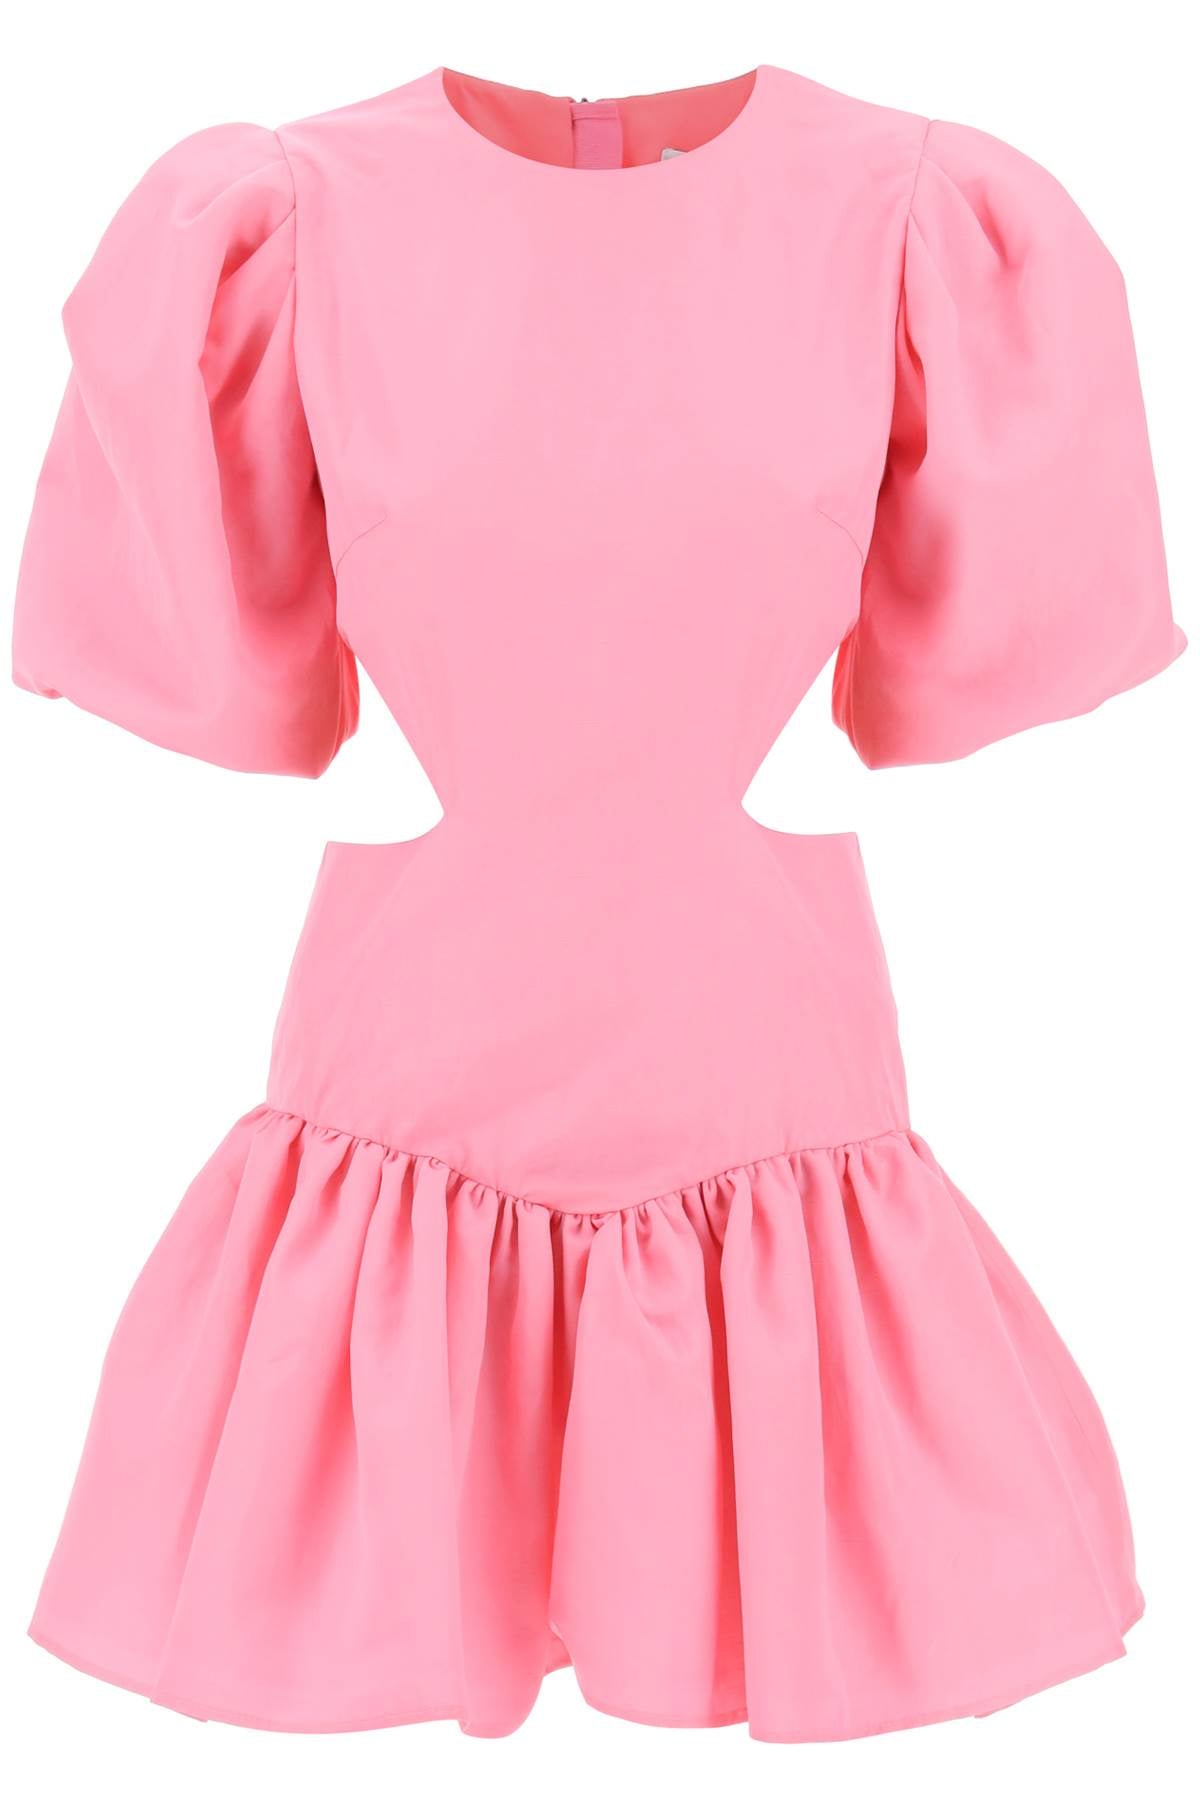 Msgm mini dress with balloon sleeves and cut-outs 3442MDA44 237309 ROSA